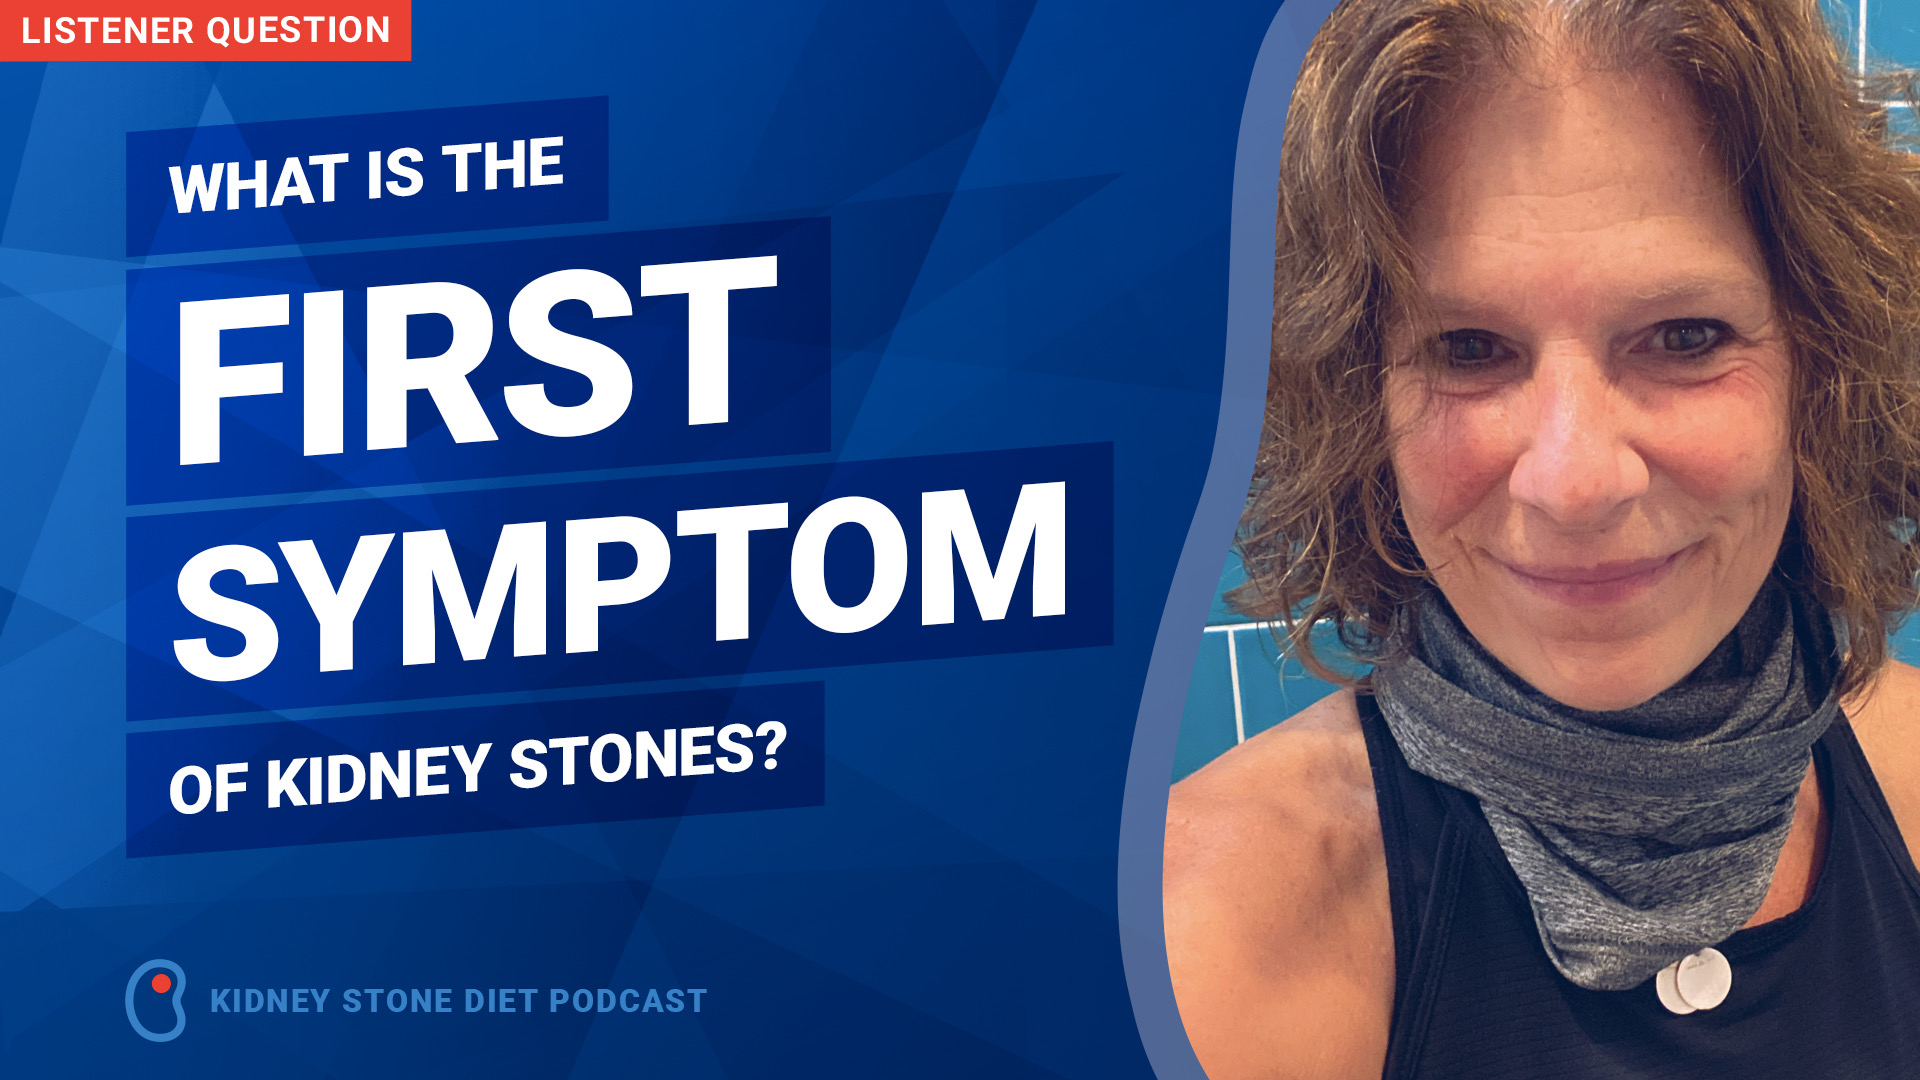 What is the first symptom of kidney stones?